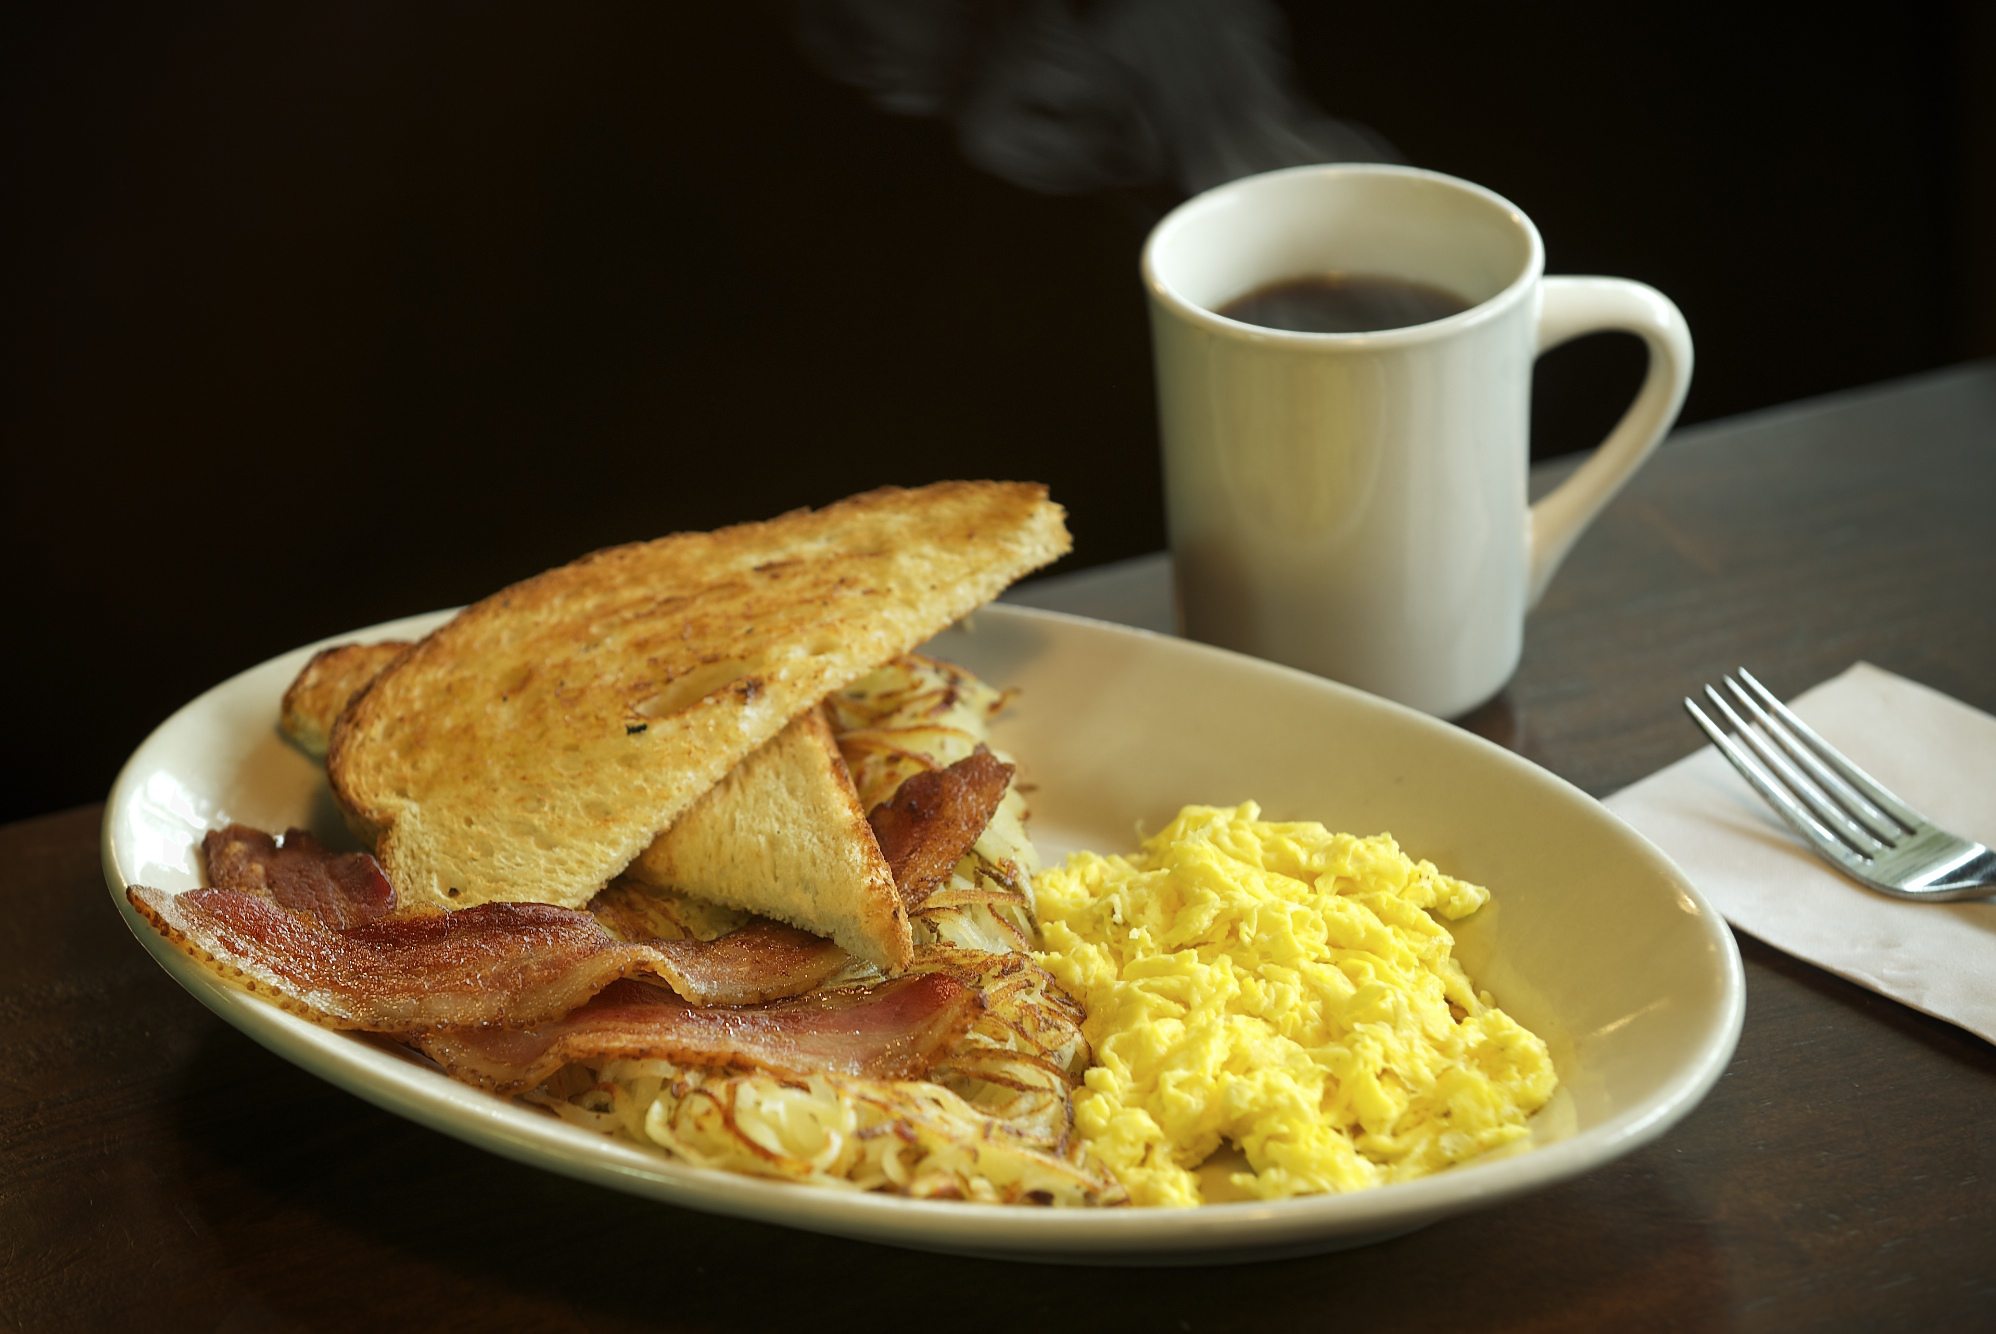 The half-order of the Cookhouse Platter includes eggs; ham, bacon or sausage; hash browns; and either toast or a biscuit.